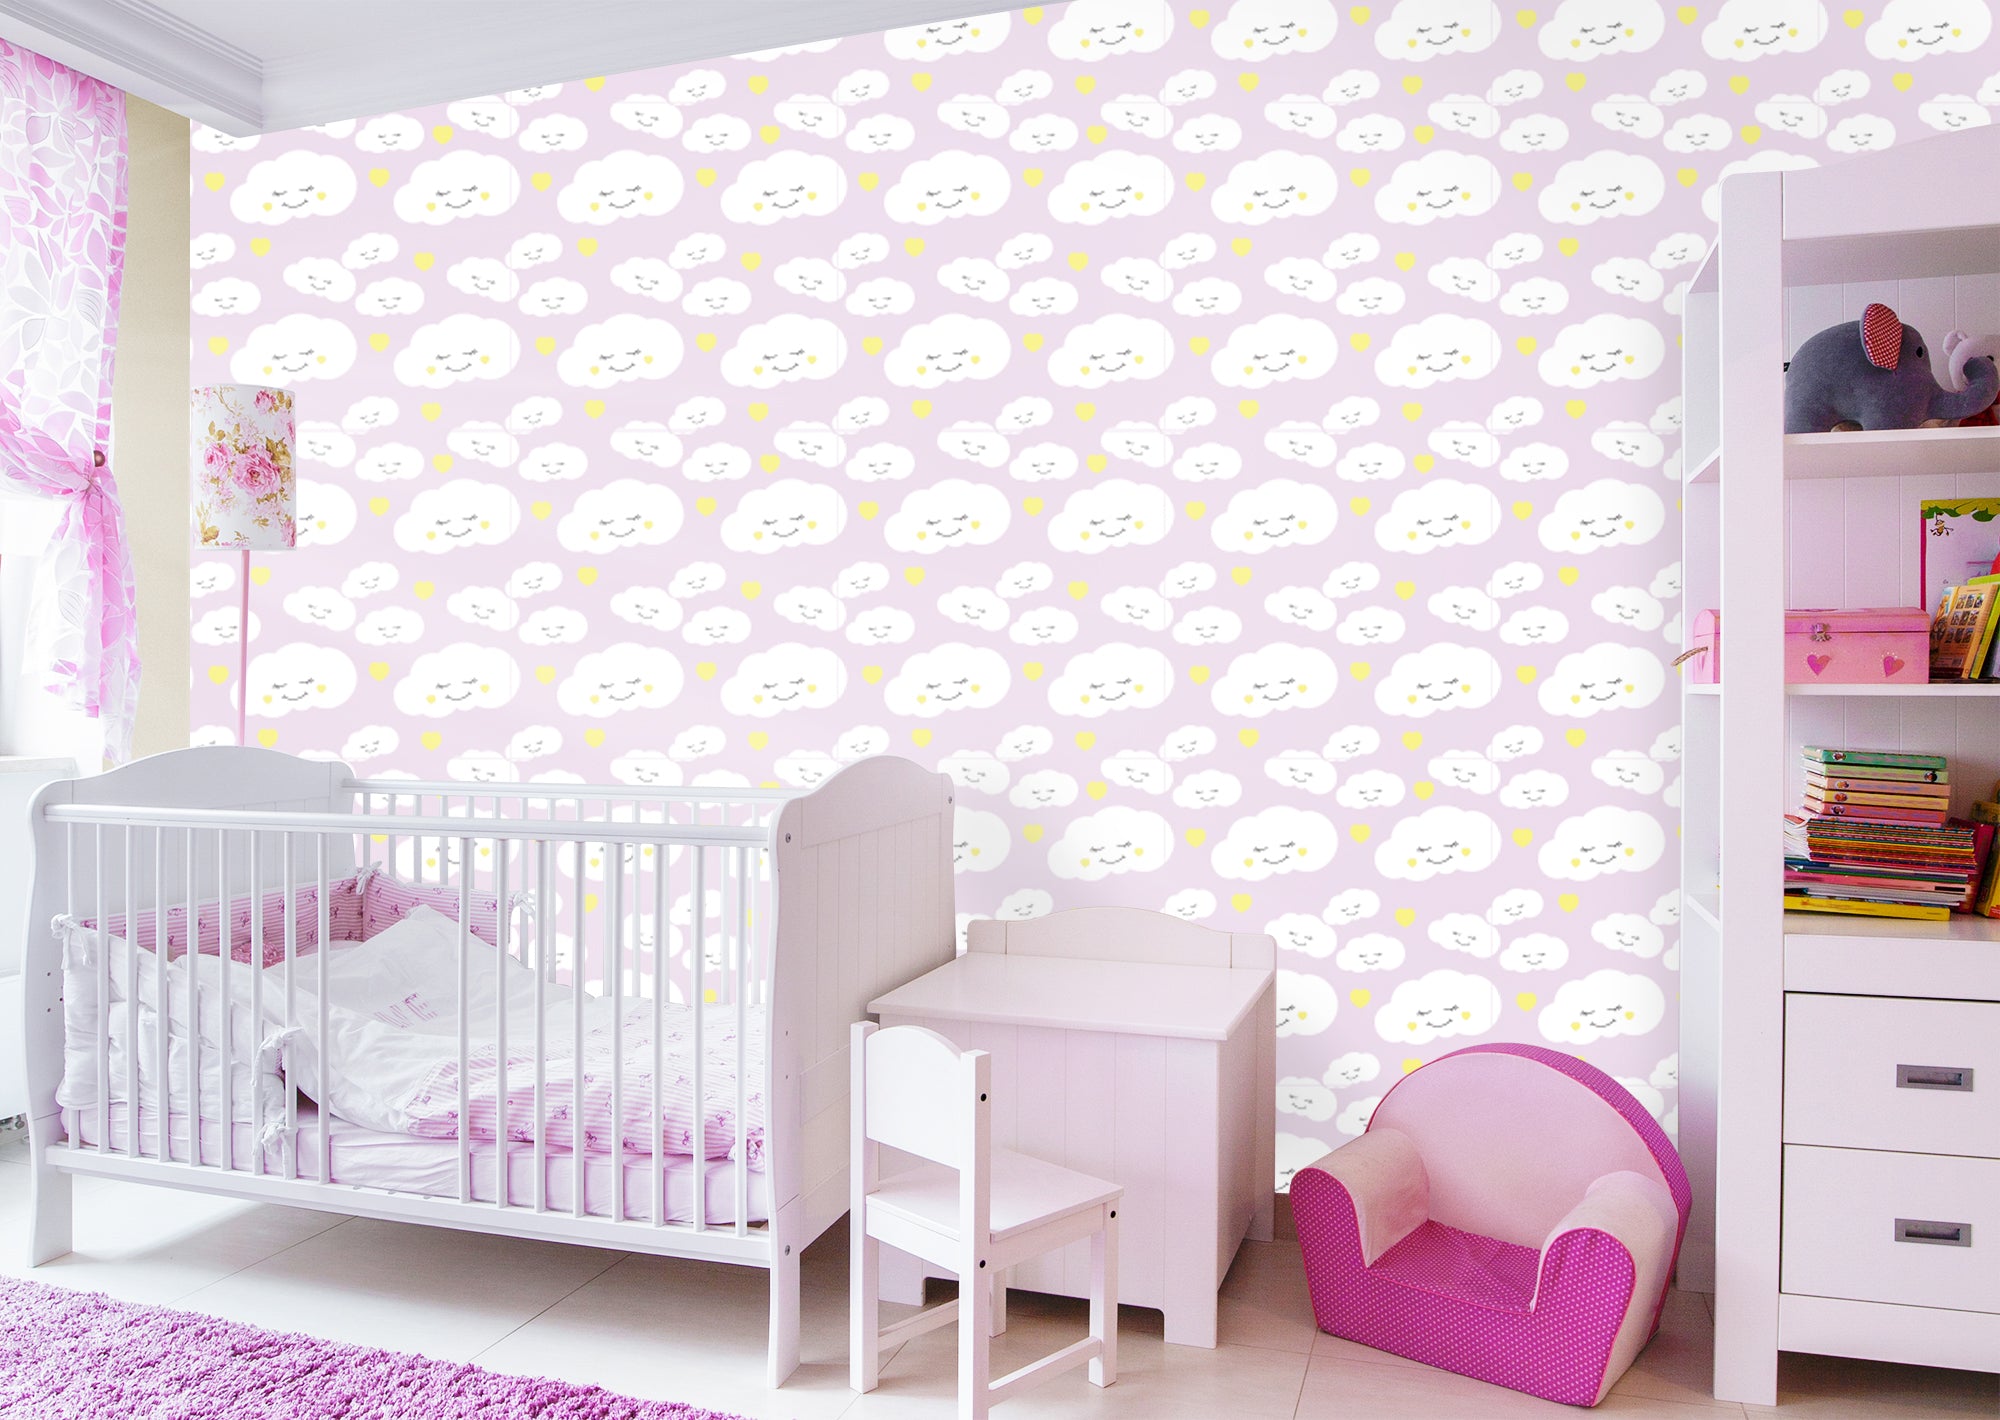 For Crying Out Cloud - Removable Peel & Stick Wallpaper 24" x 10.5 (21 sf) by Fathead